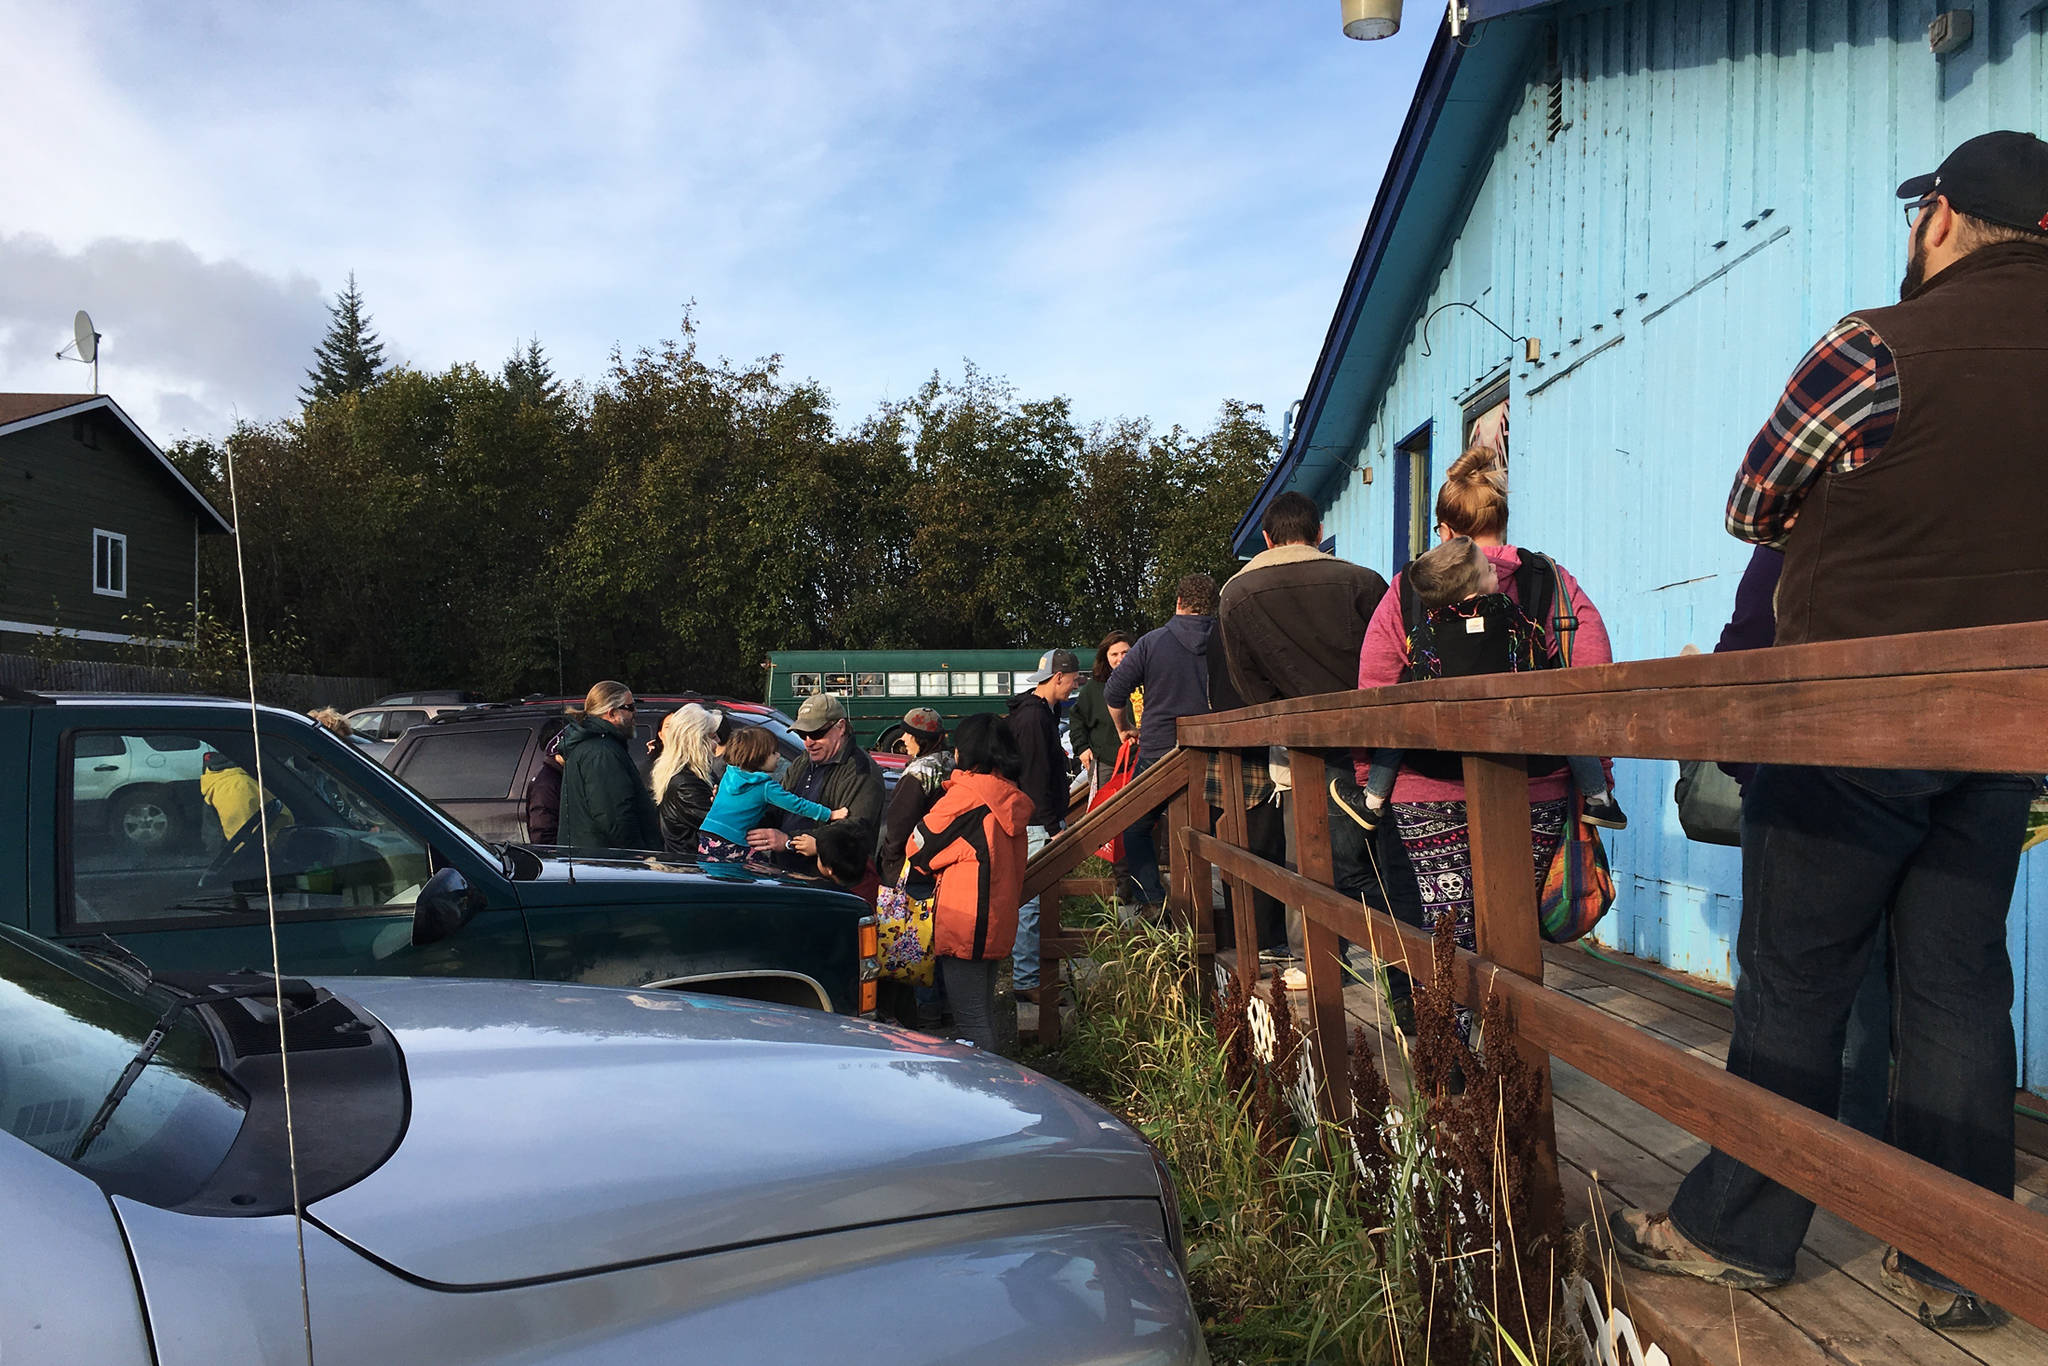 People queue up waiting for Barb’s Video and DVD to open on Saturday, Oct. 20, 2018 in Homer, Alaska. Movie lovers got there early to get their hands on their favorite films on the first day of the movie rental store’s merchandise sale. (Photo by Megan Pacer/Homer News)